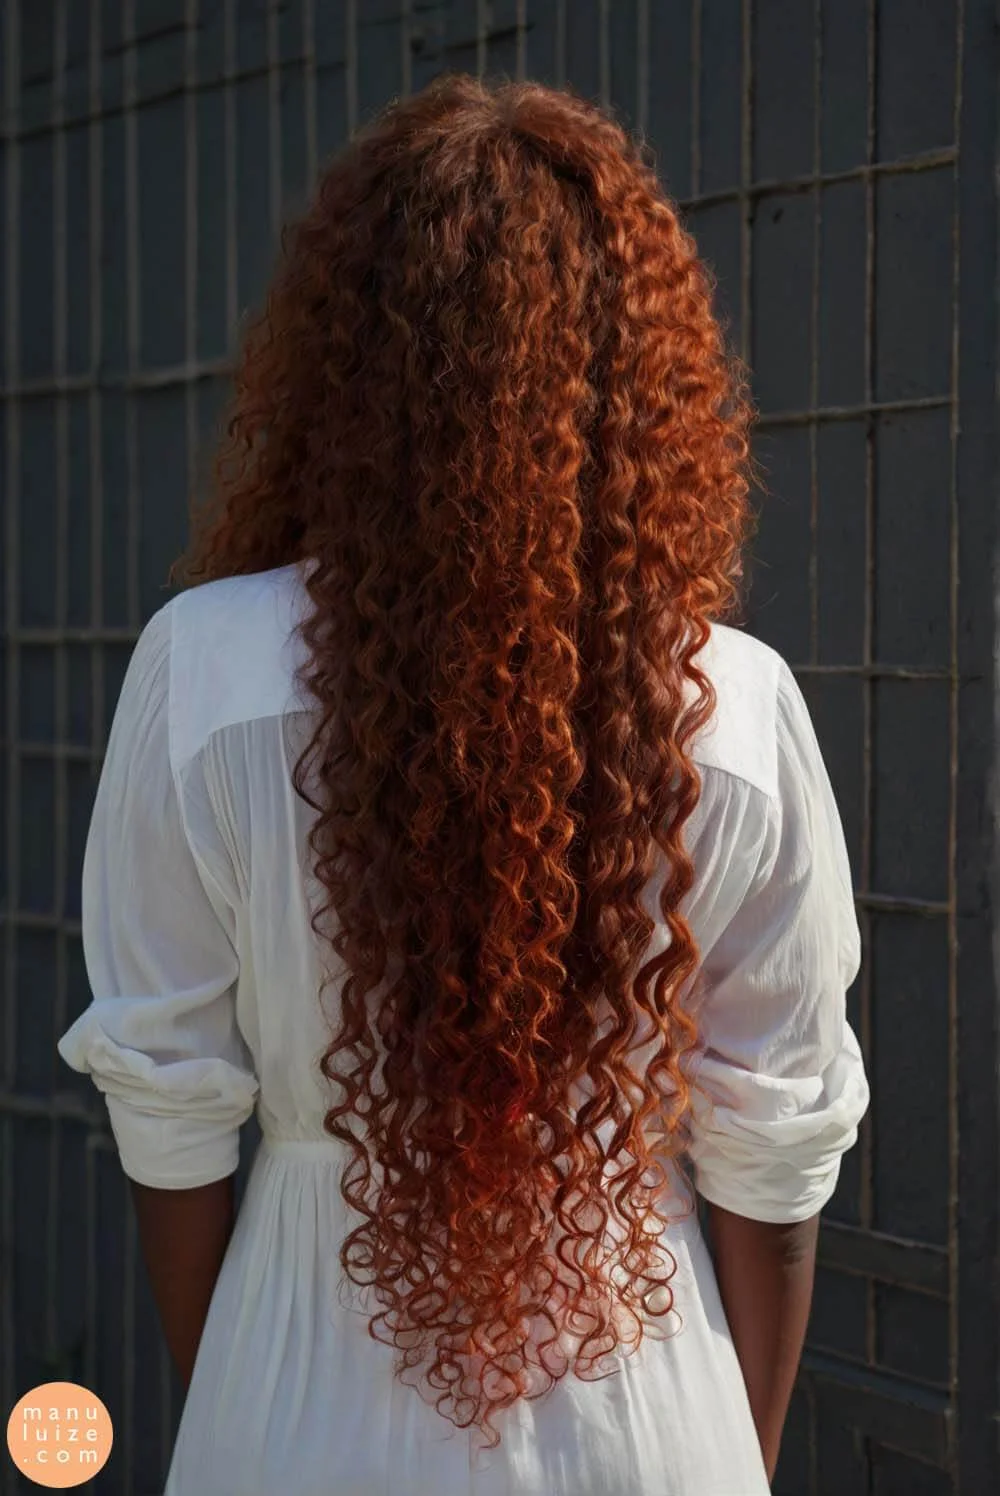 Long curly copper red hair